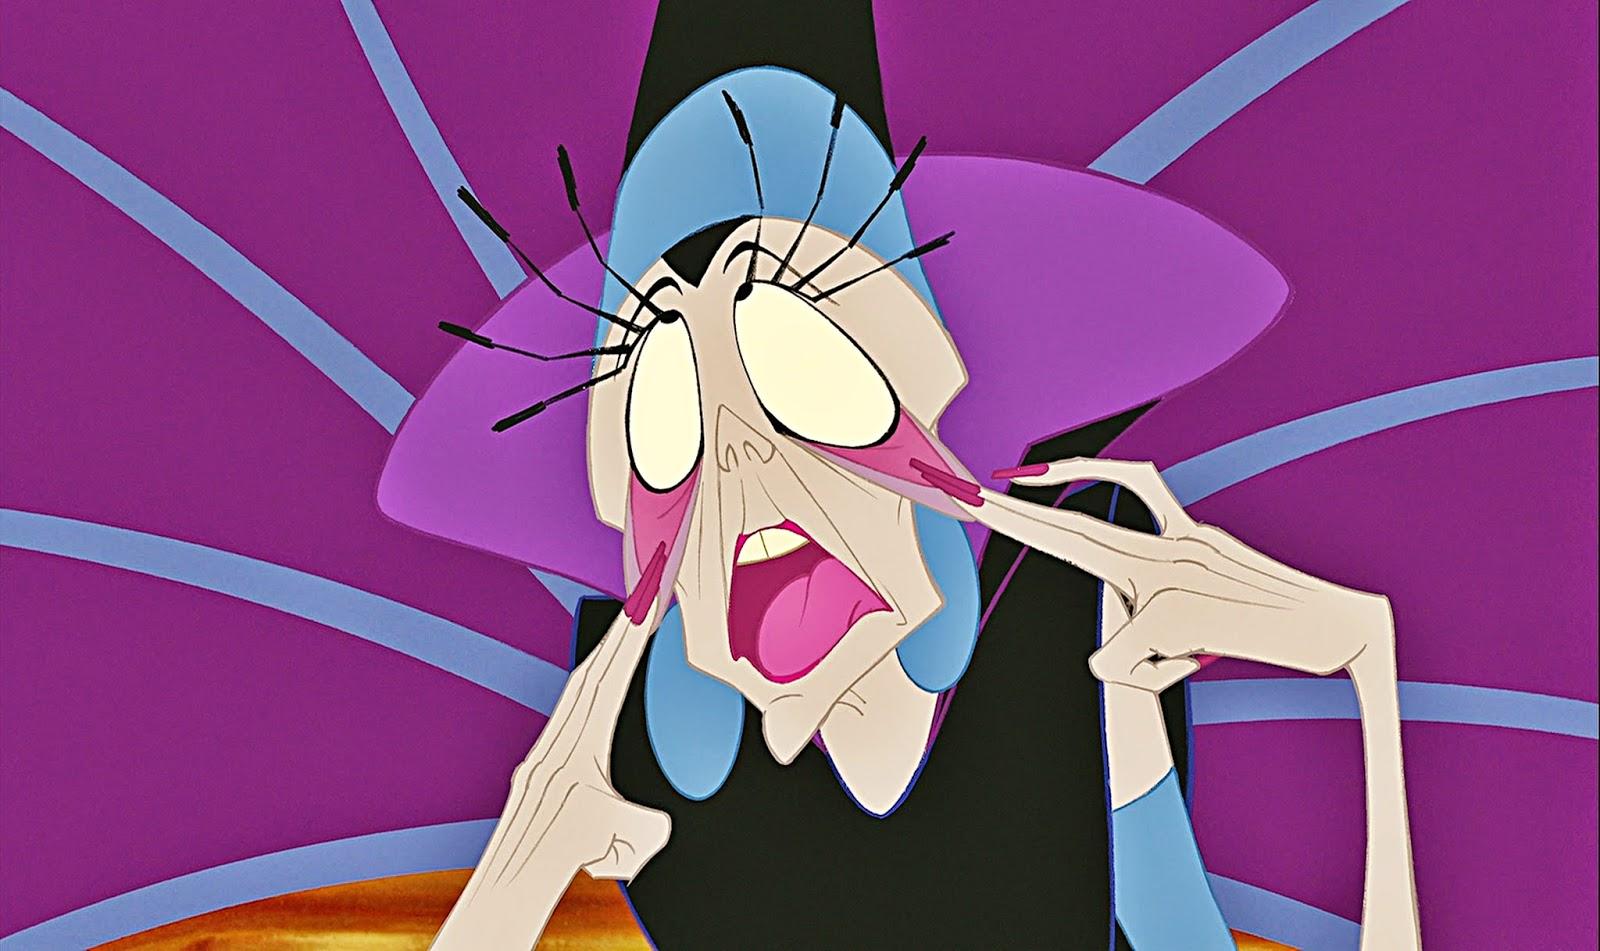 Ways You Relate To Yzma From The Emperor's New Groove.